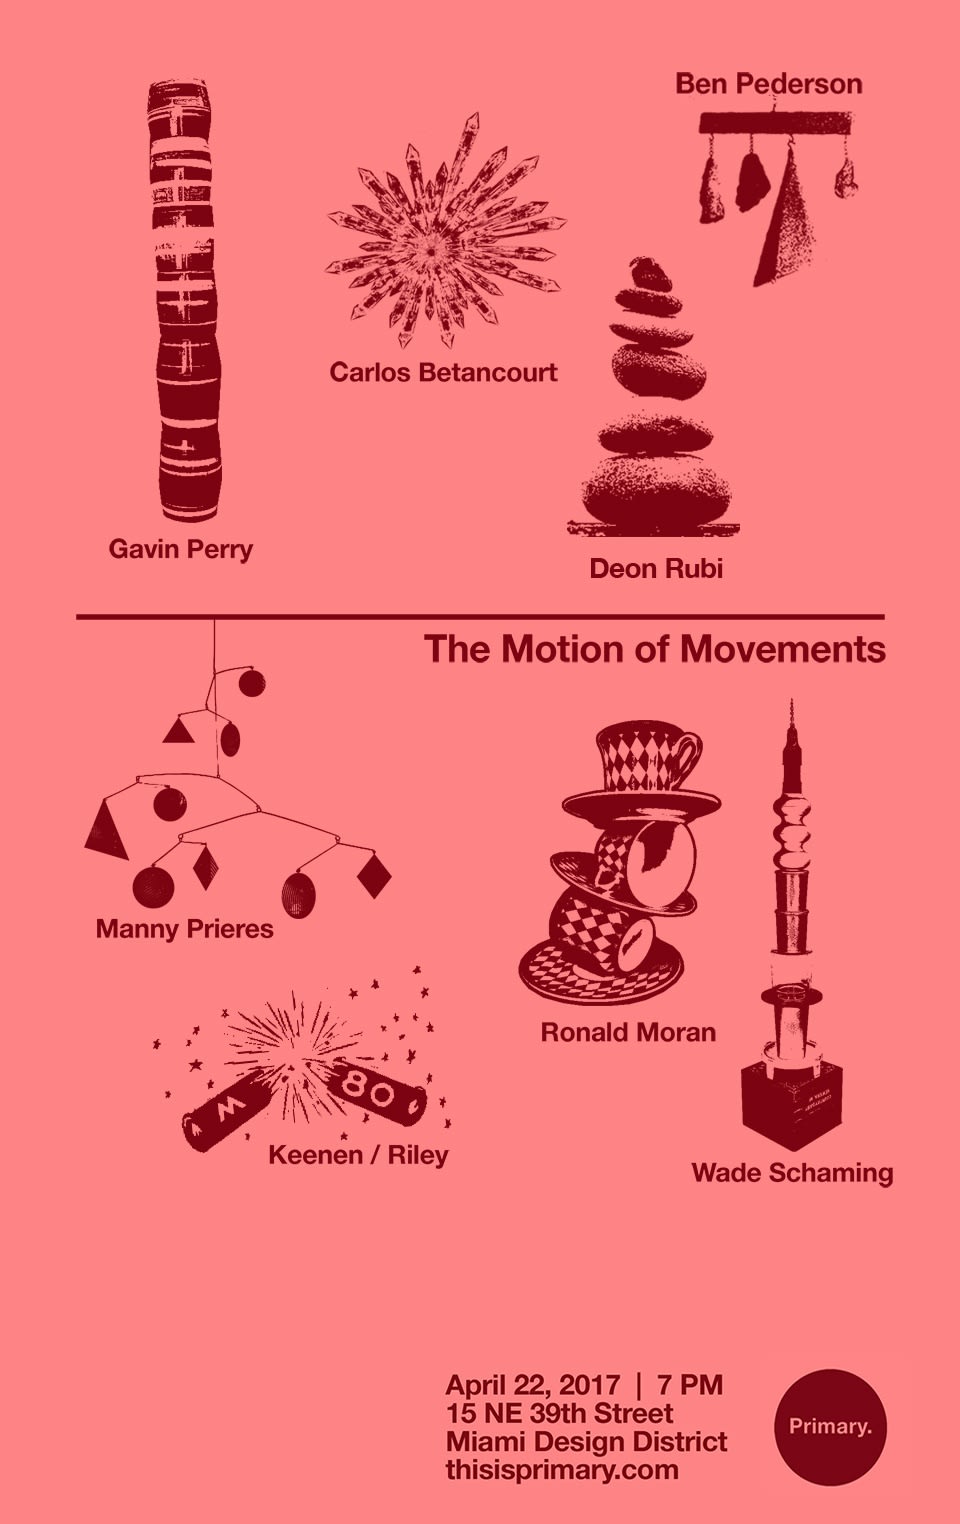 The Motion of Movements